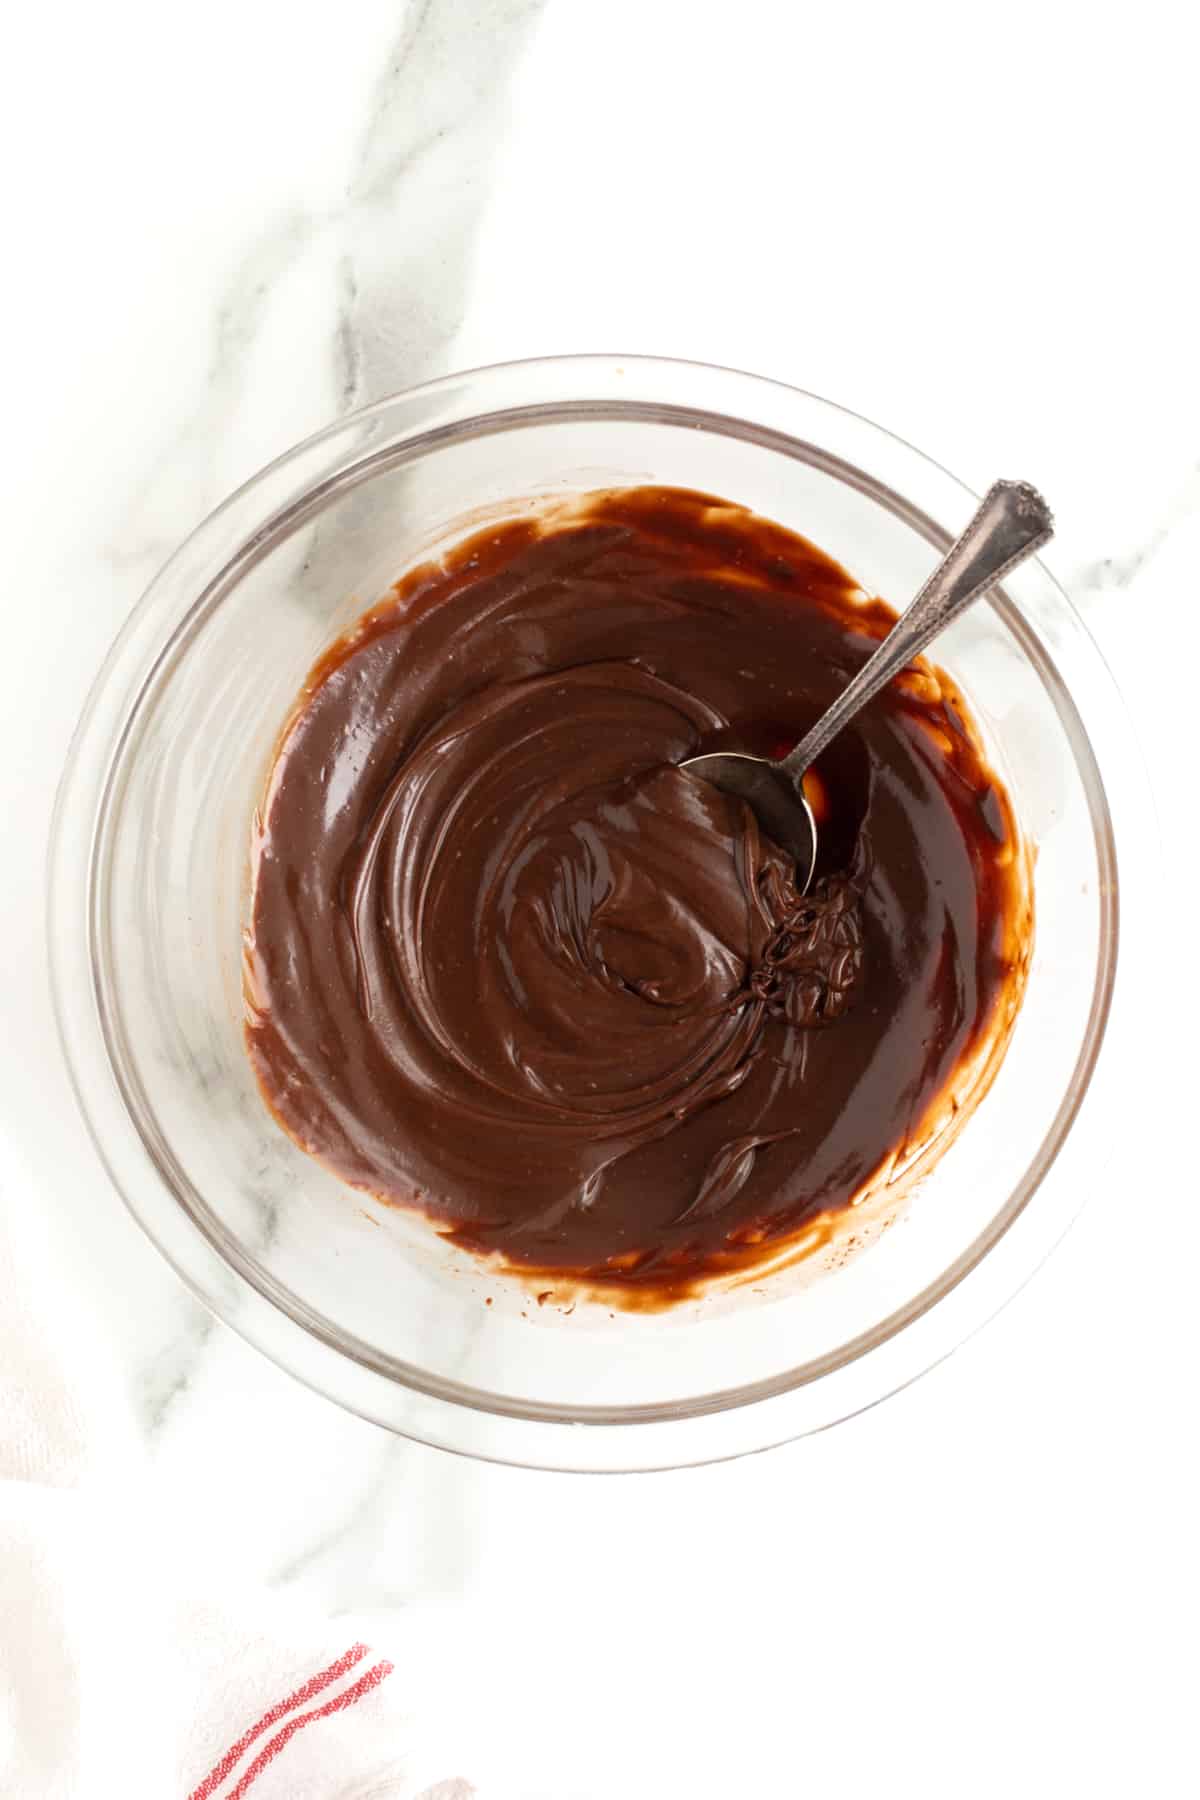 Chocolate ganache in a clear glass bowl with a metal spoon.